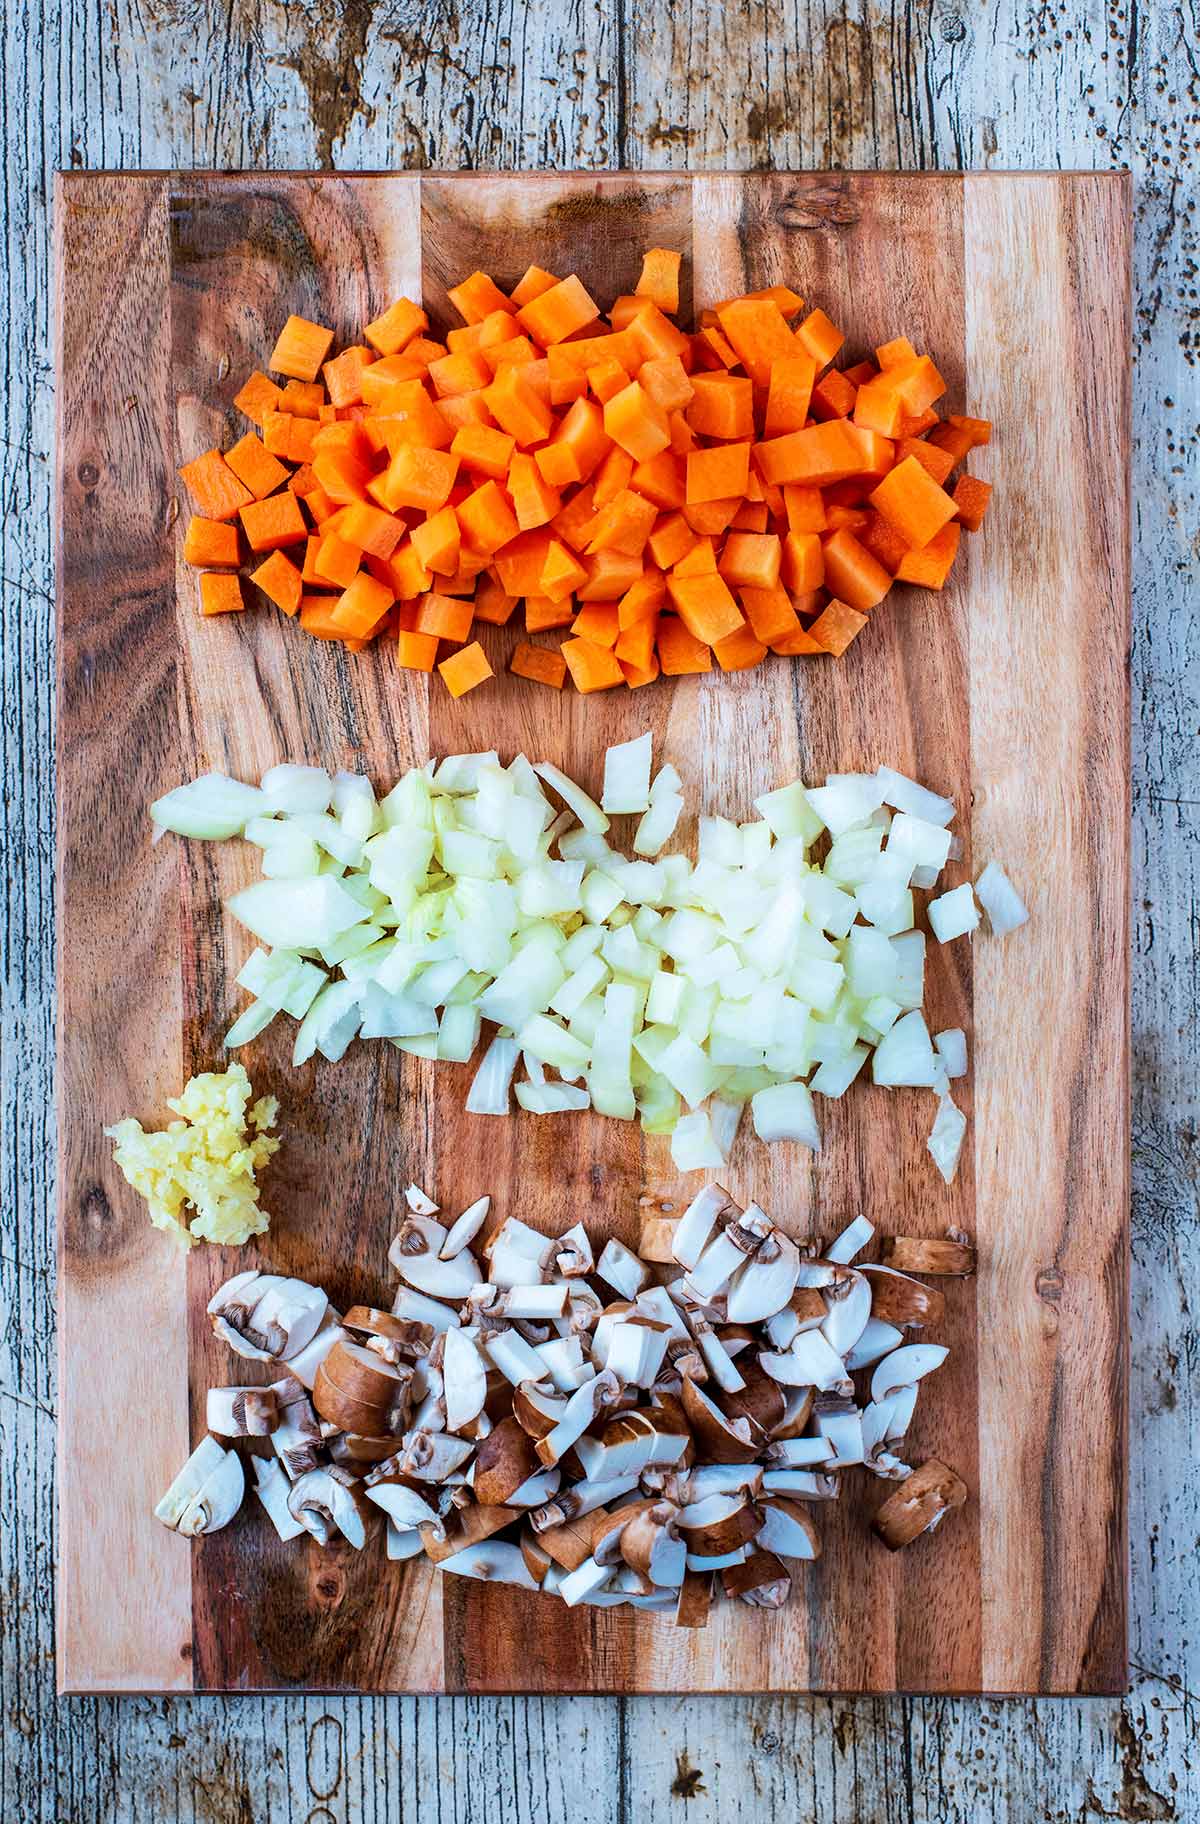 A wooden chopping board with chopped mushrooms, onion, carrot and garlic.